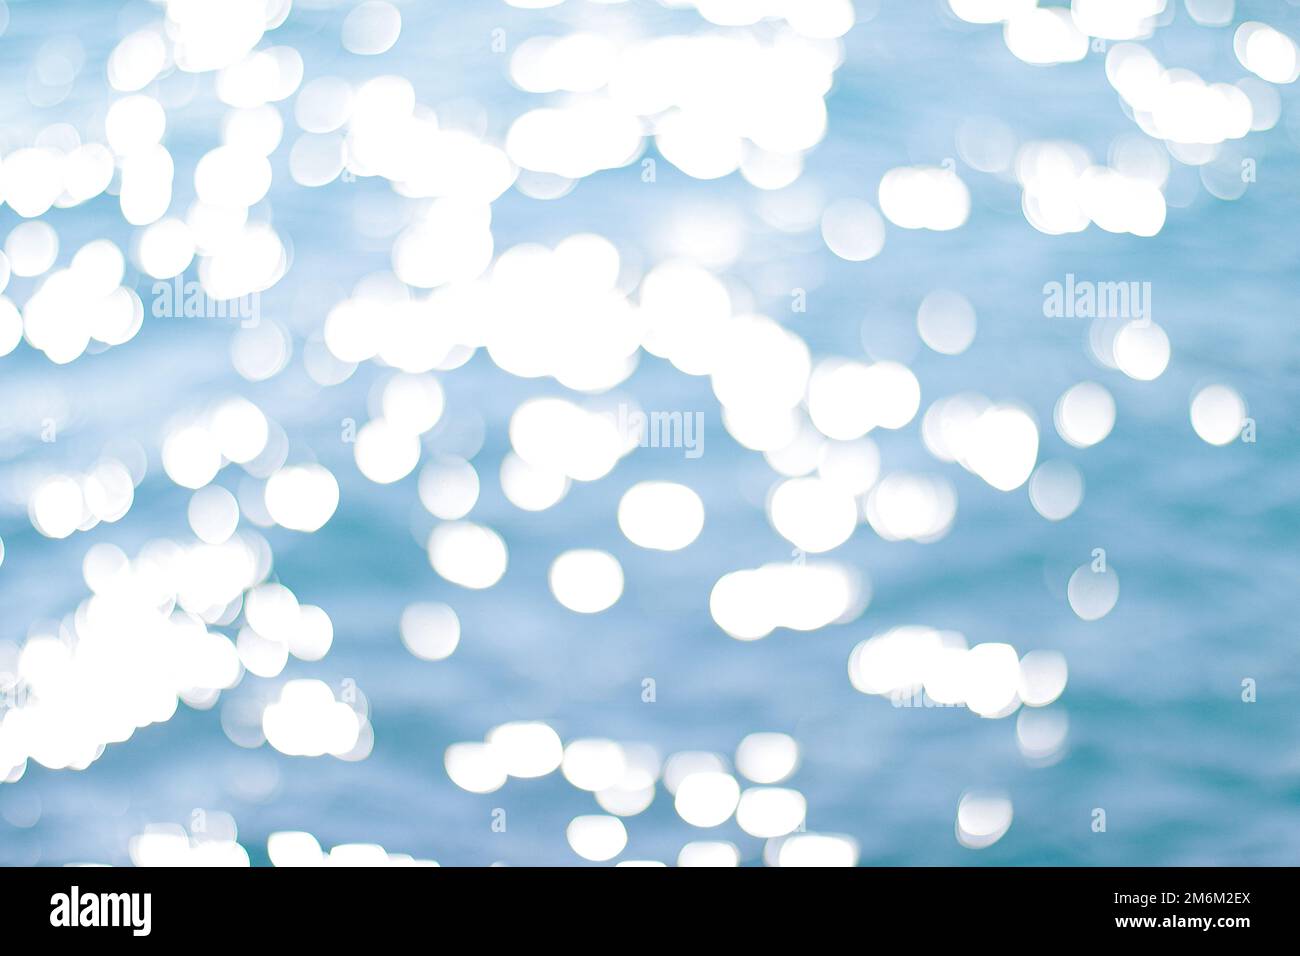 Blurry blue sea water background, dark ocean as nature and environmental design Stock Photo